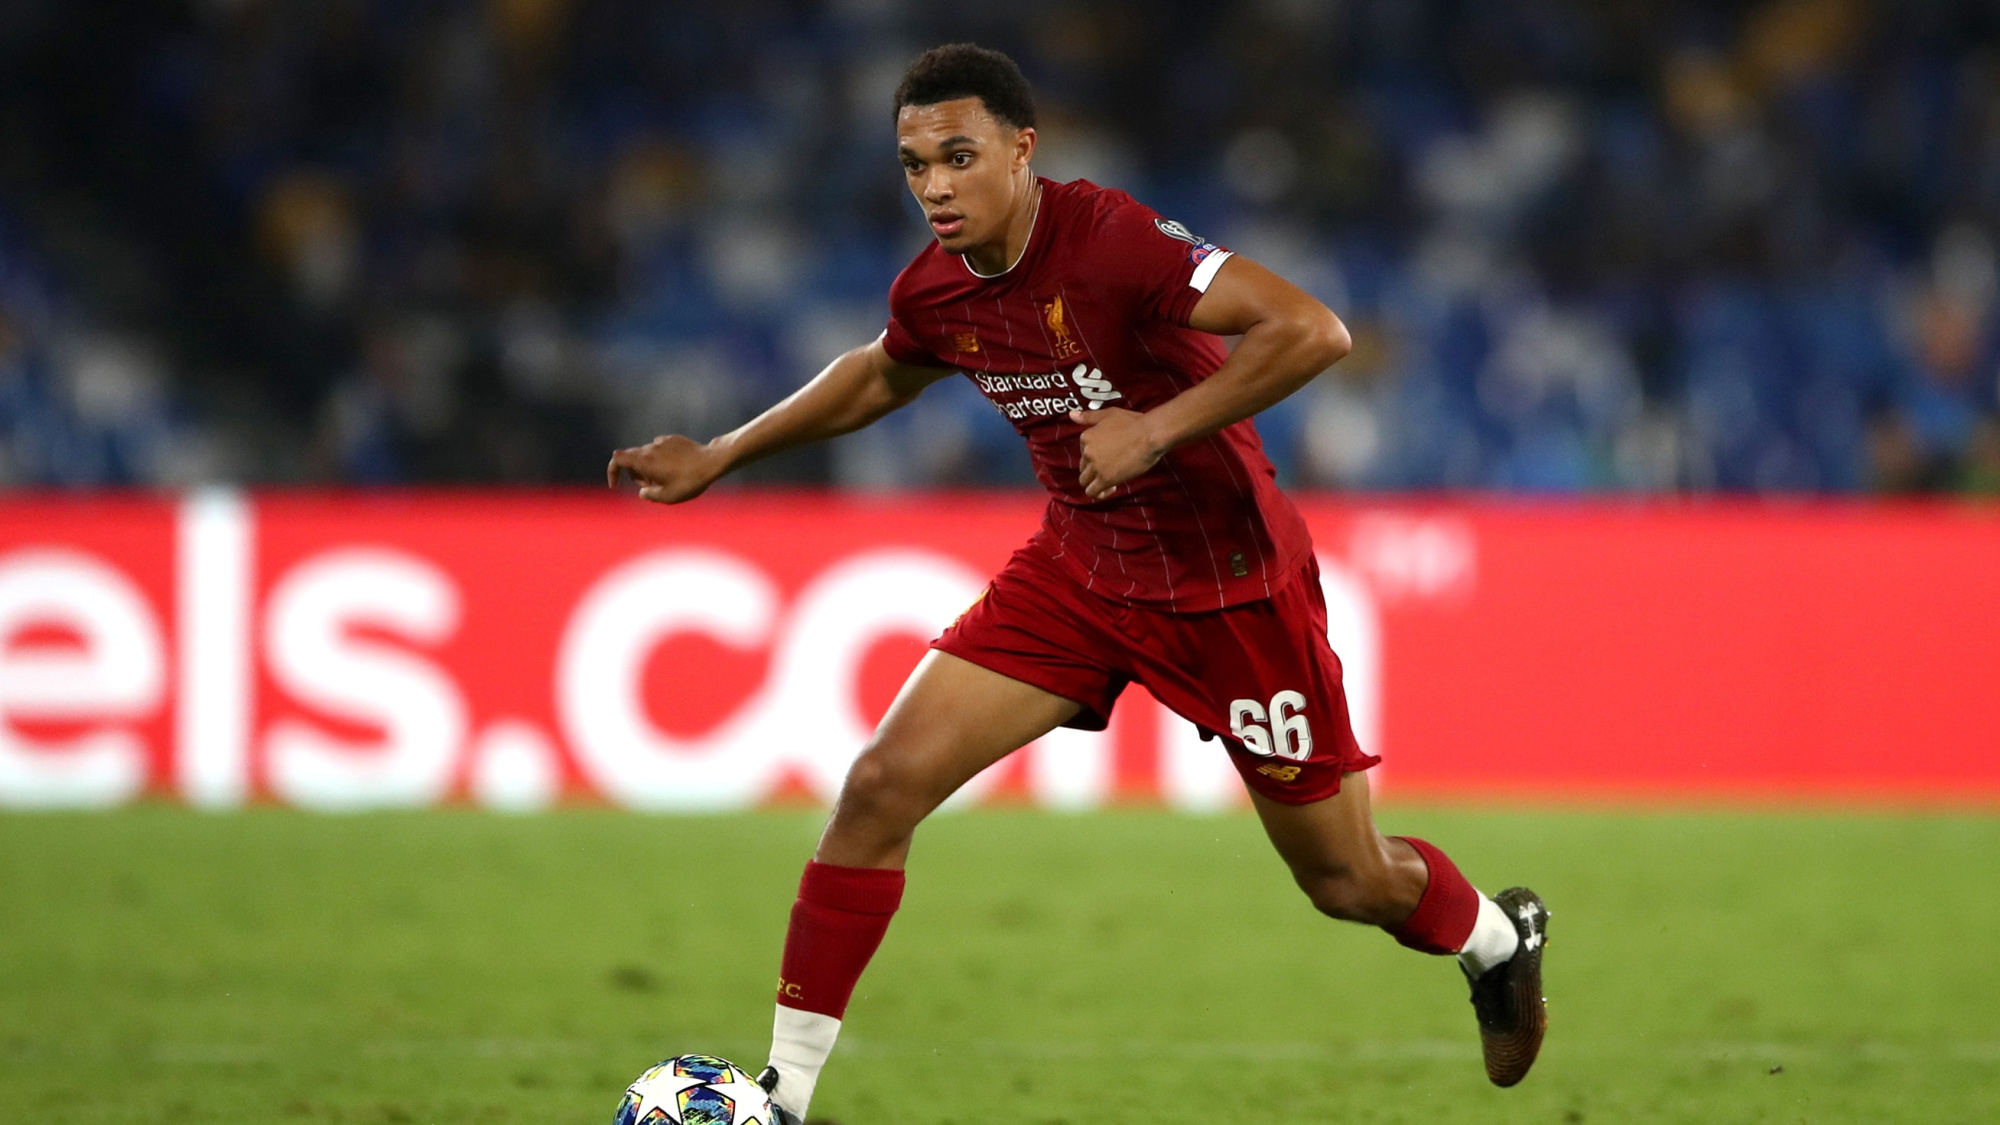 (Video) Another game, another otherworldly pass from Trent Alexander-Arnold